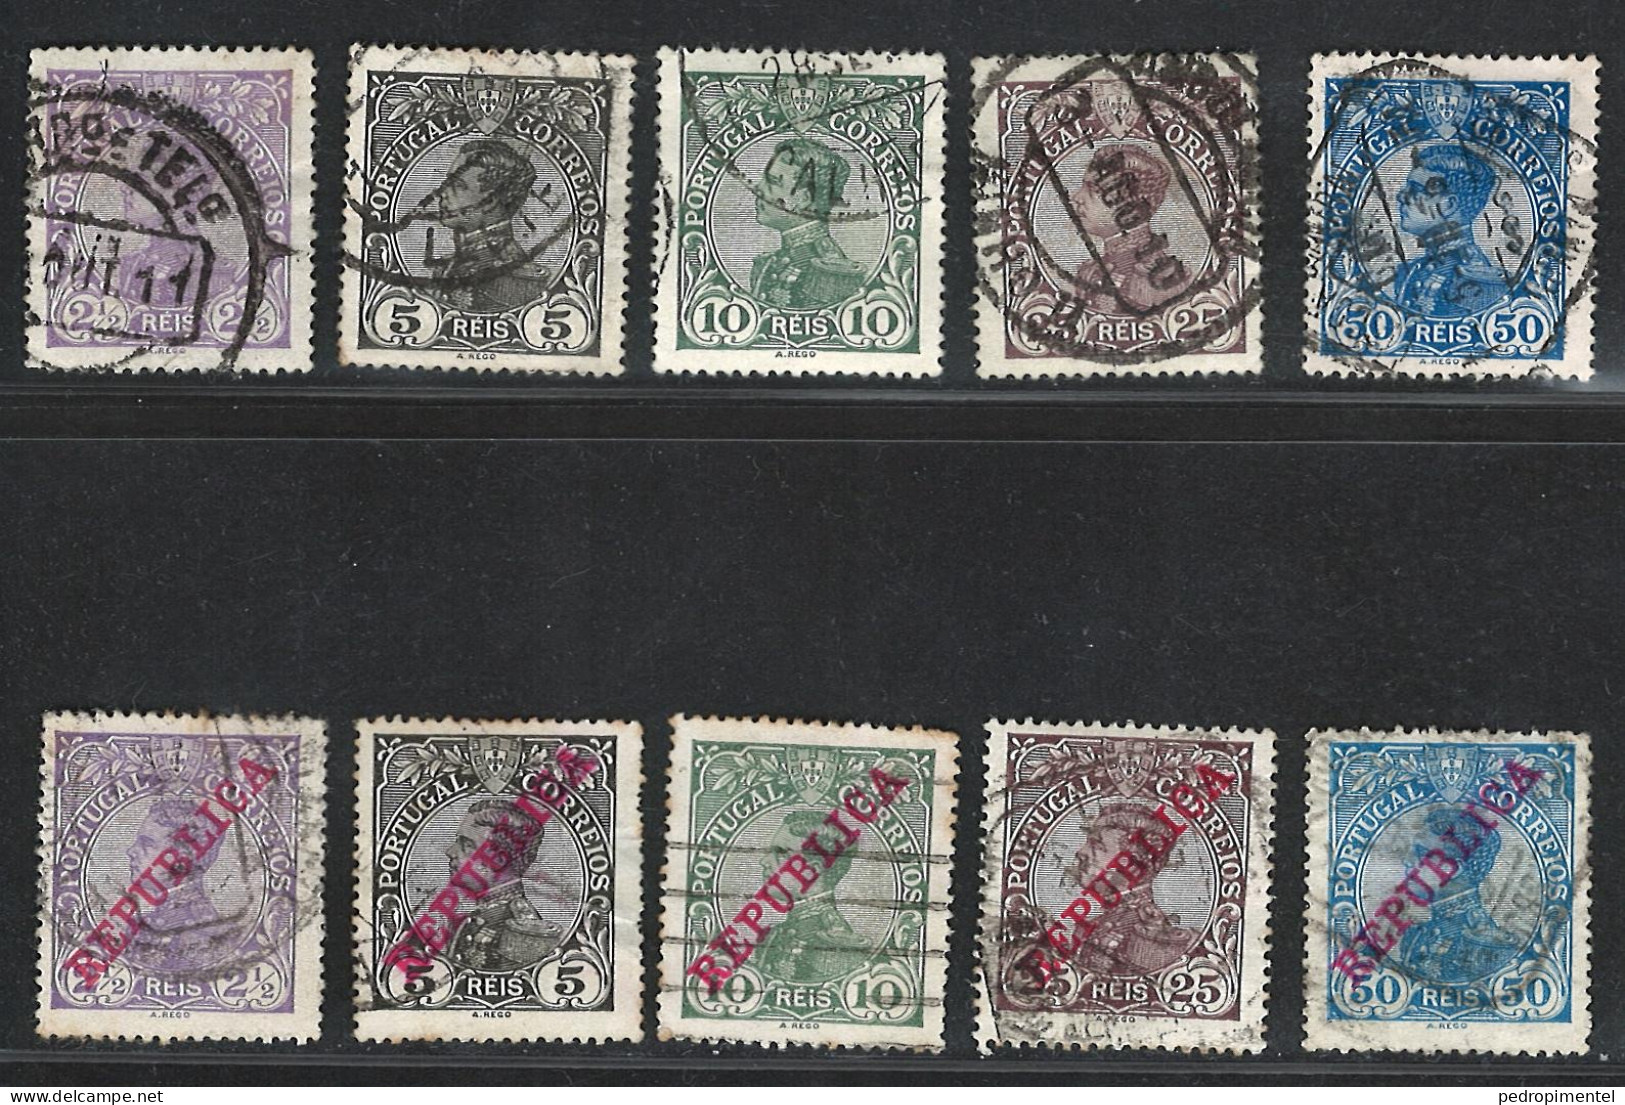 Portugal Stamps 1910 D Manuel II & Surcharge Republica Condition Used  #156, 157, 158, 161, 164, 165 - Usado